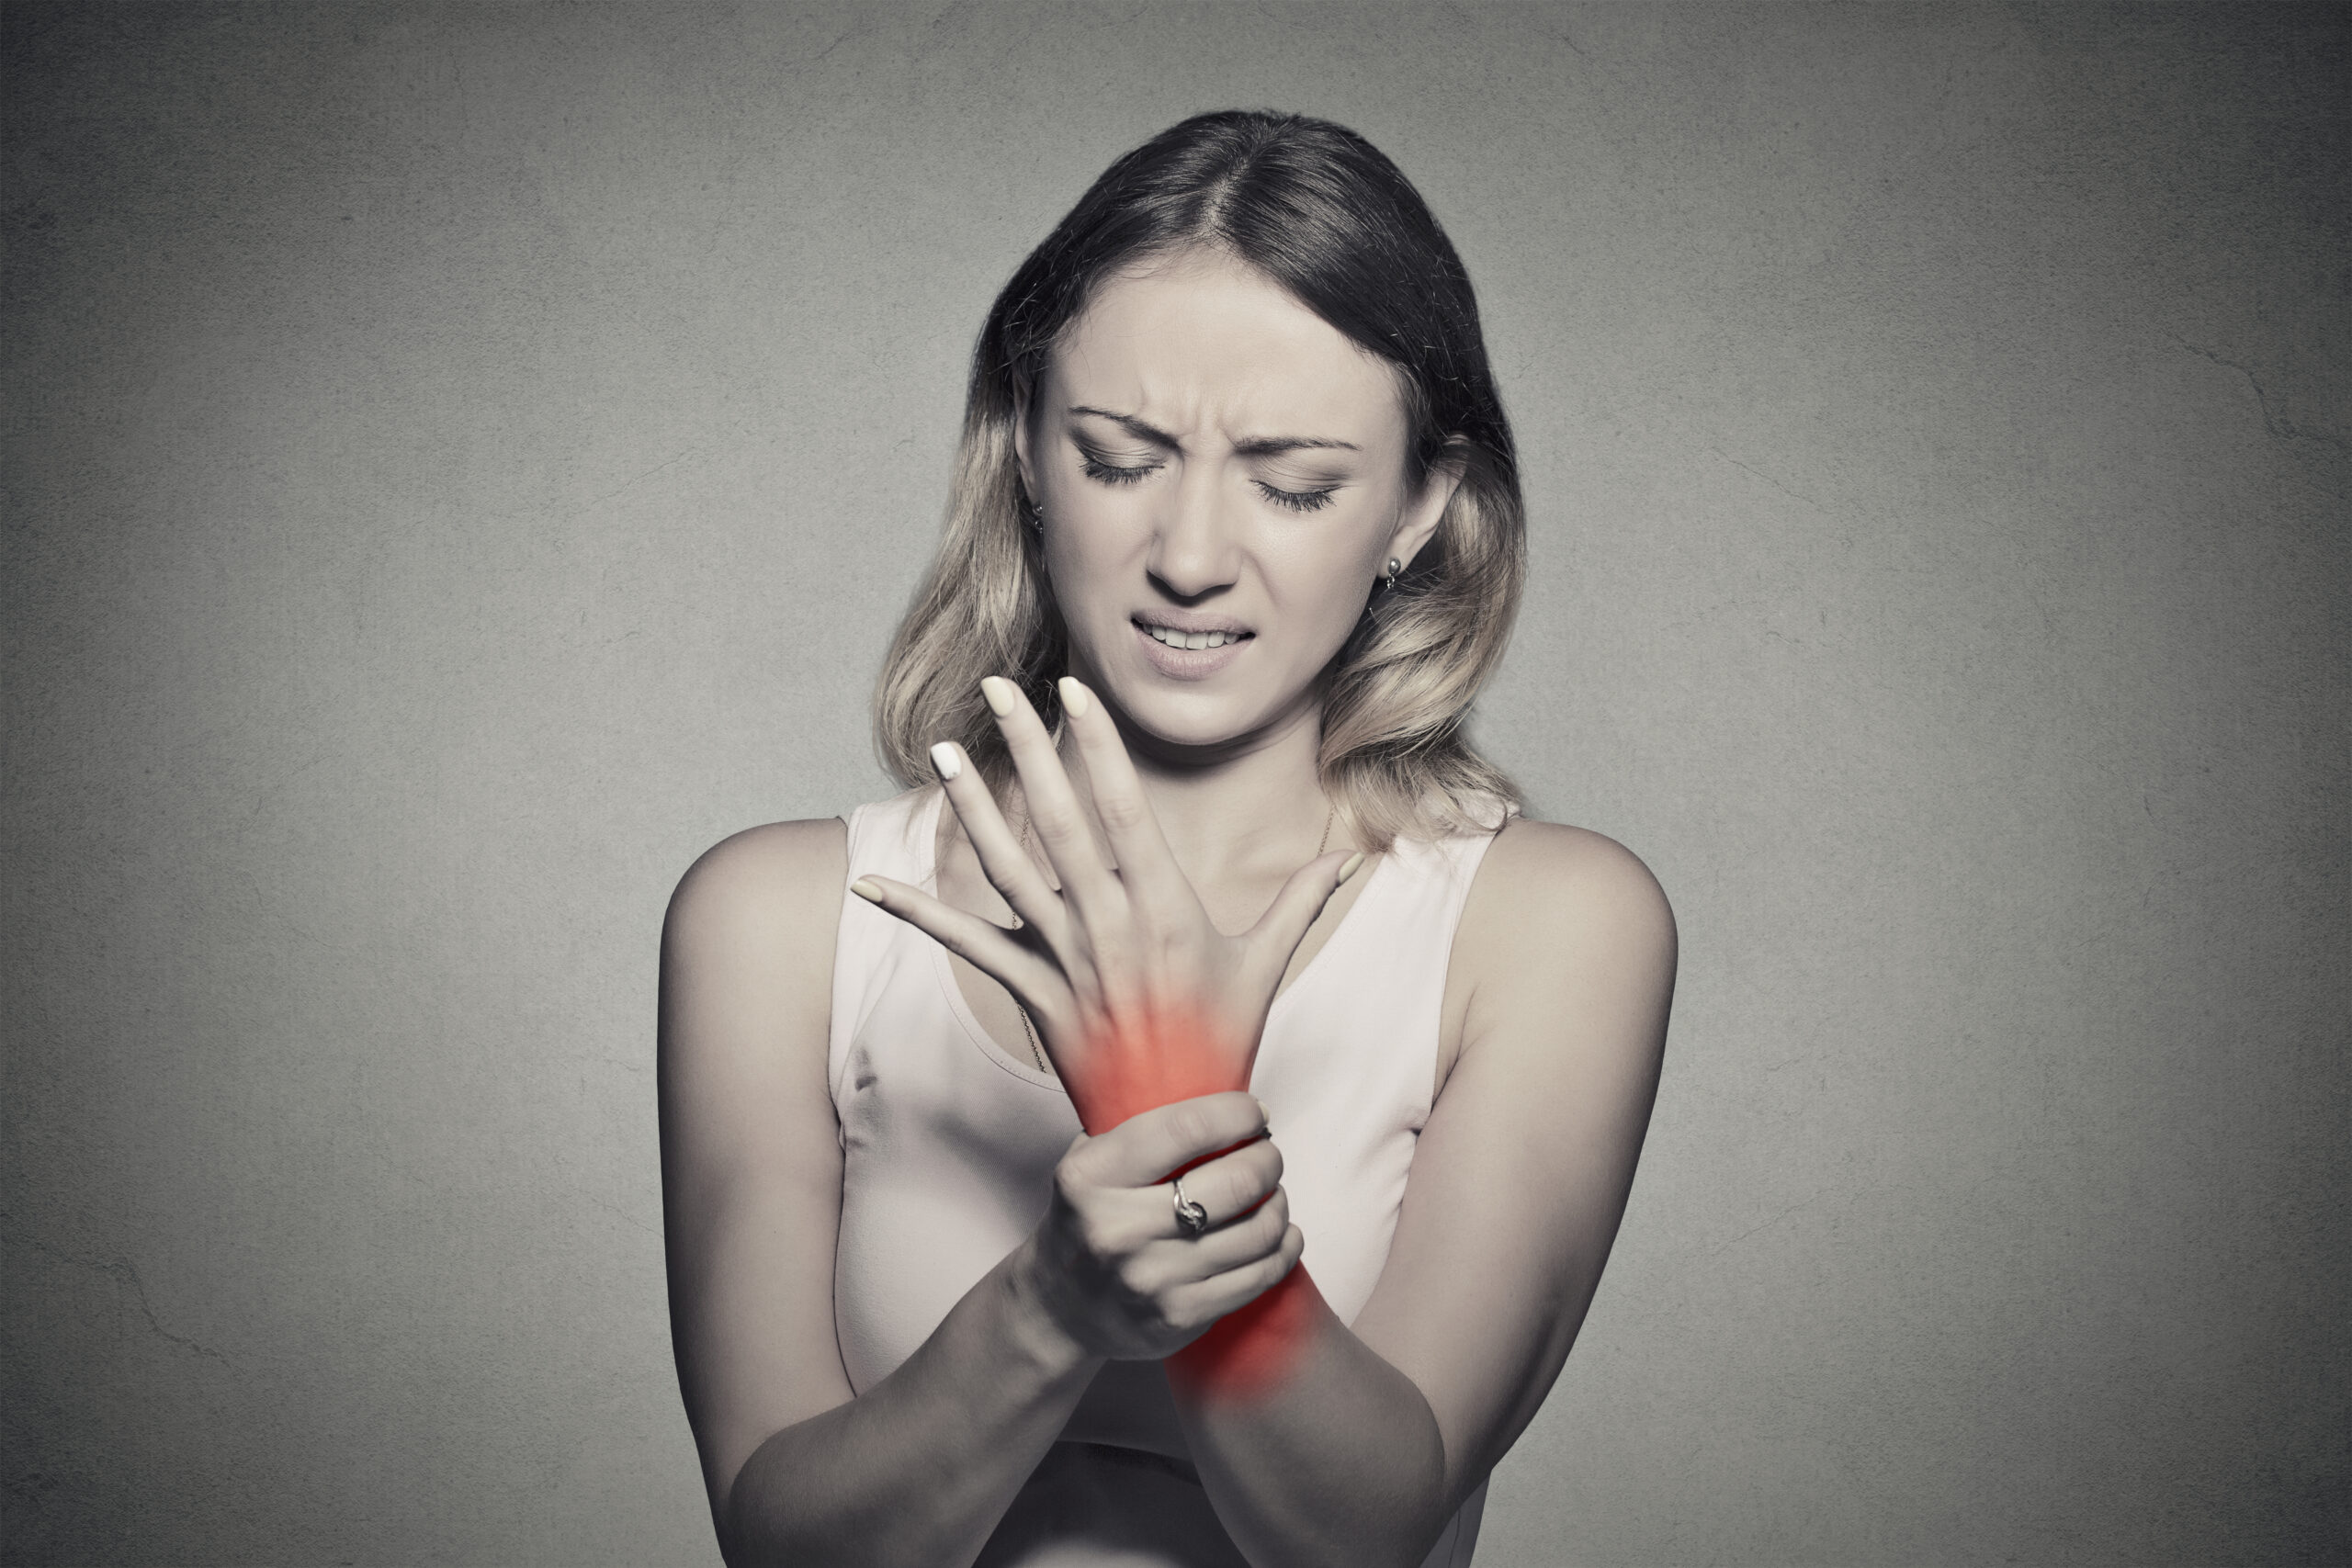 How Can You Tell If You Have Nerve Pain or Muscle Pain?